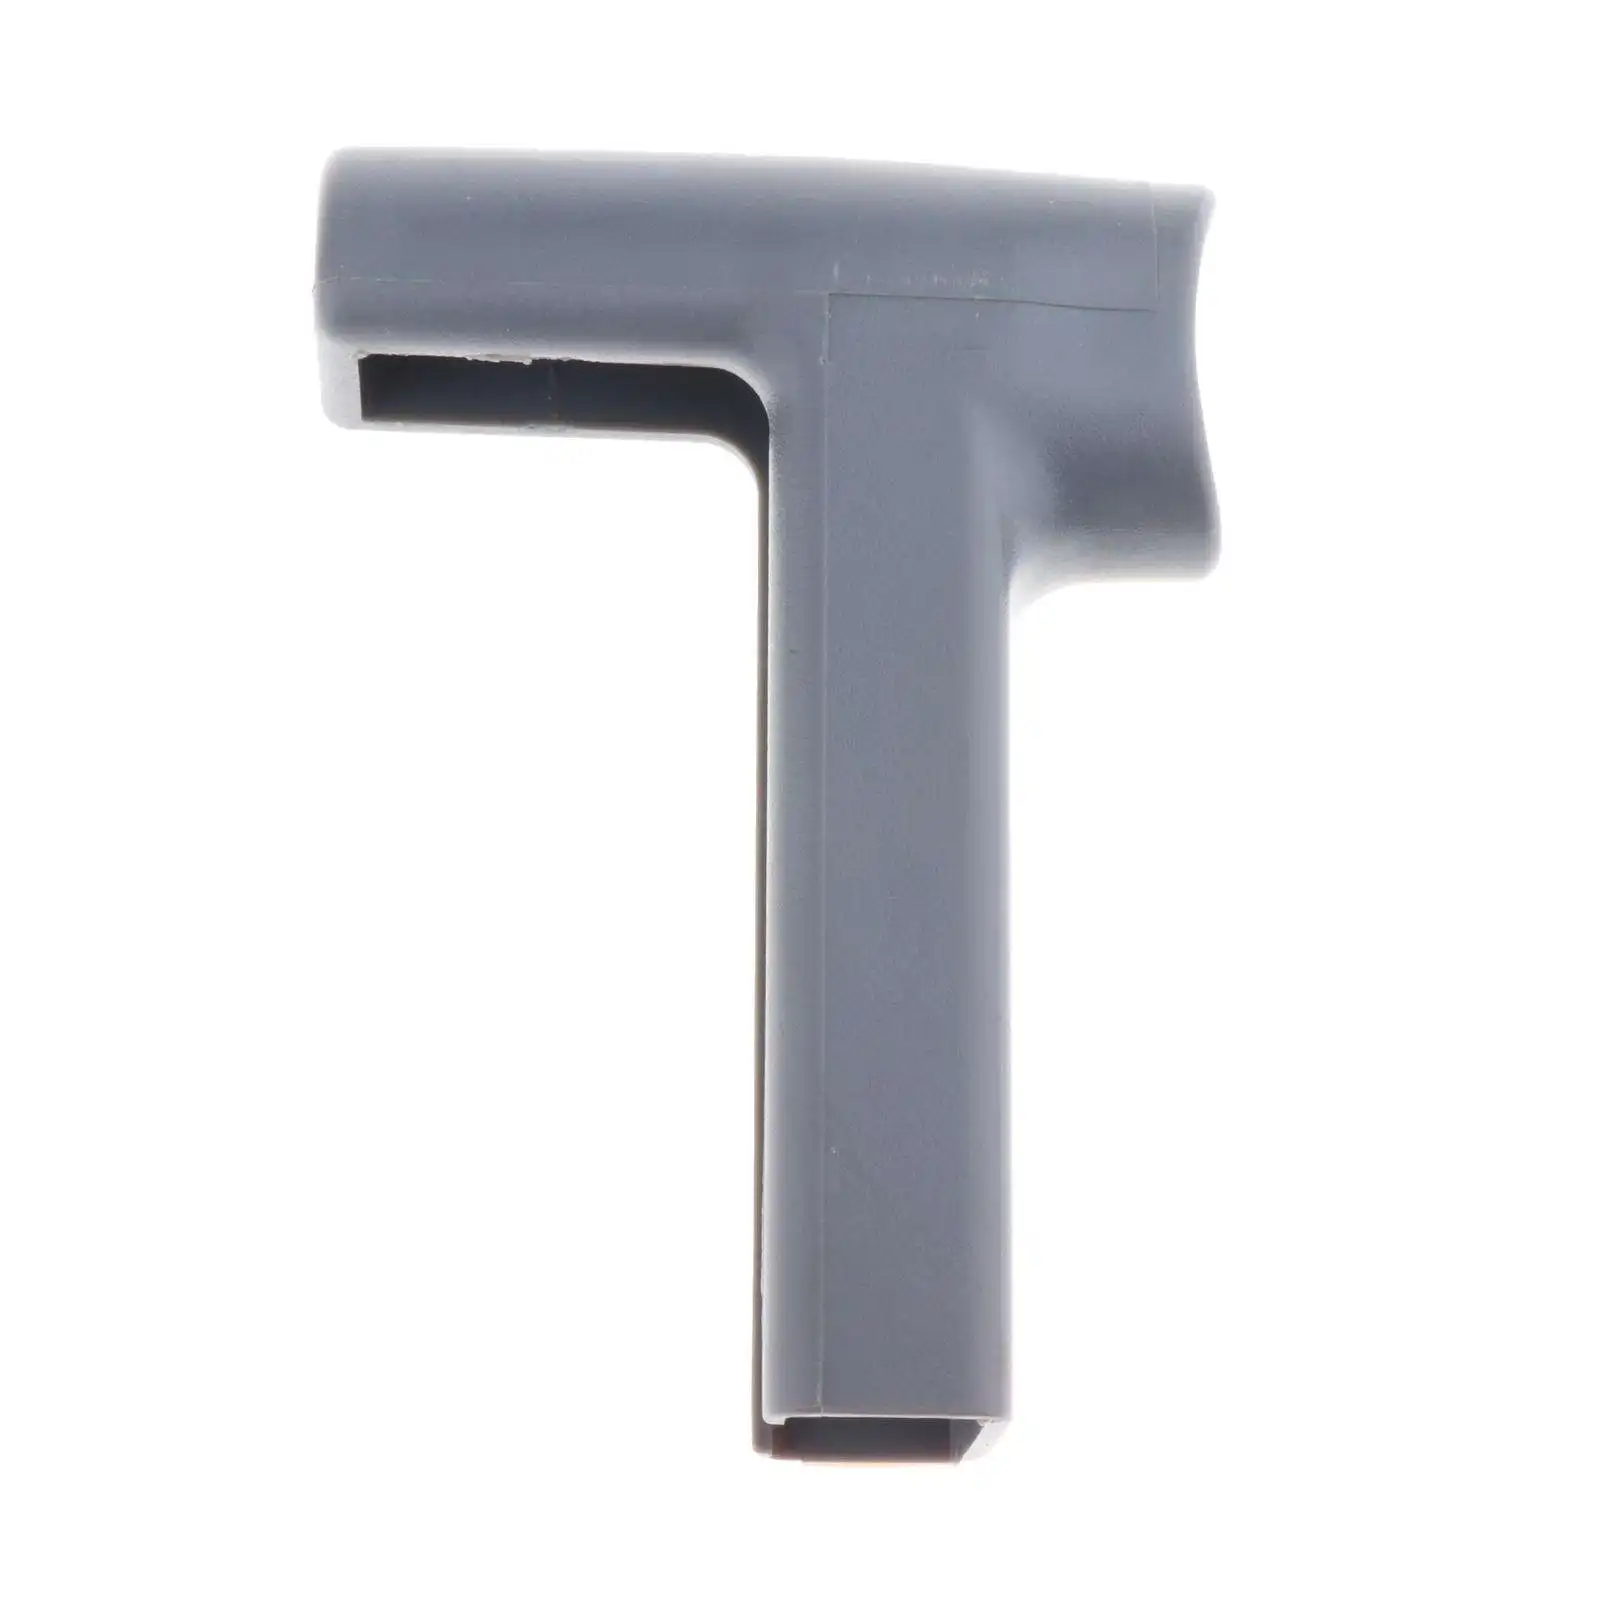 Heavy-duty Handle Housing Suit for Yamaha Outboard Motor Remote Control Box Accessory 703-48222-00